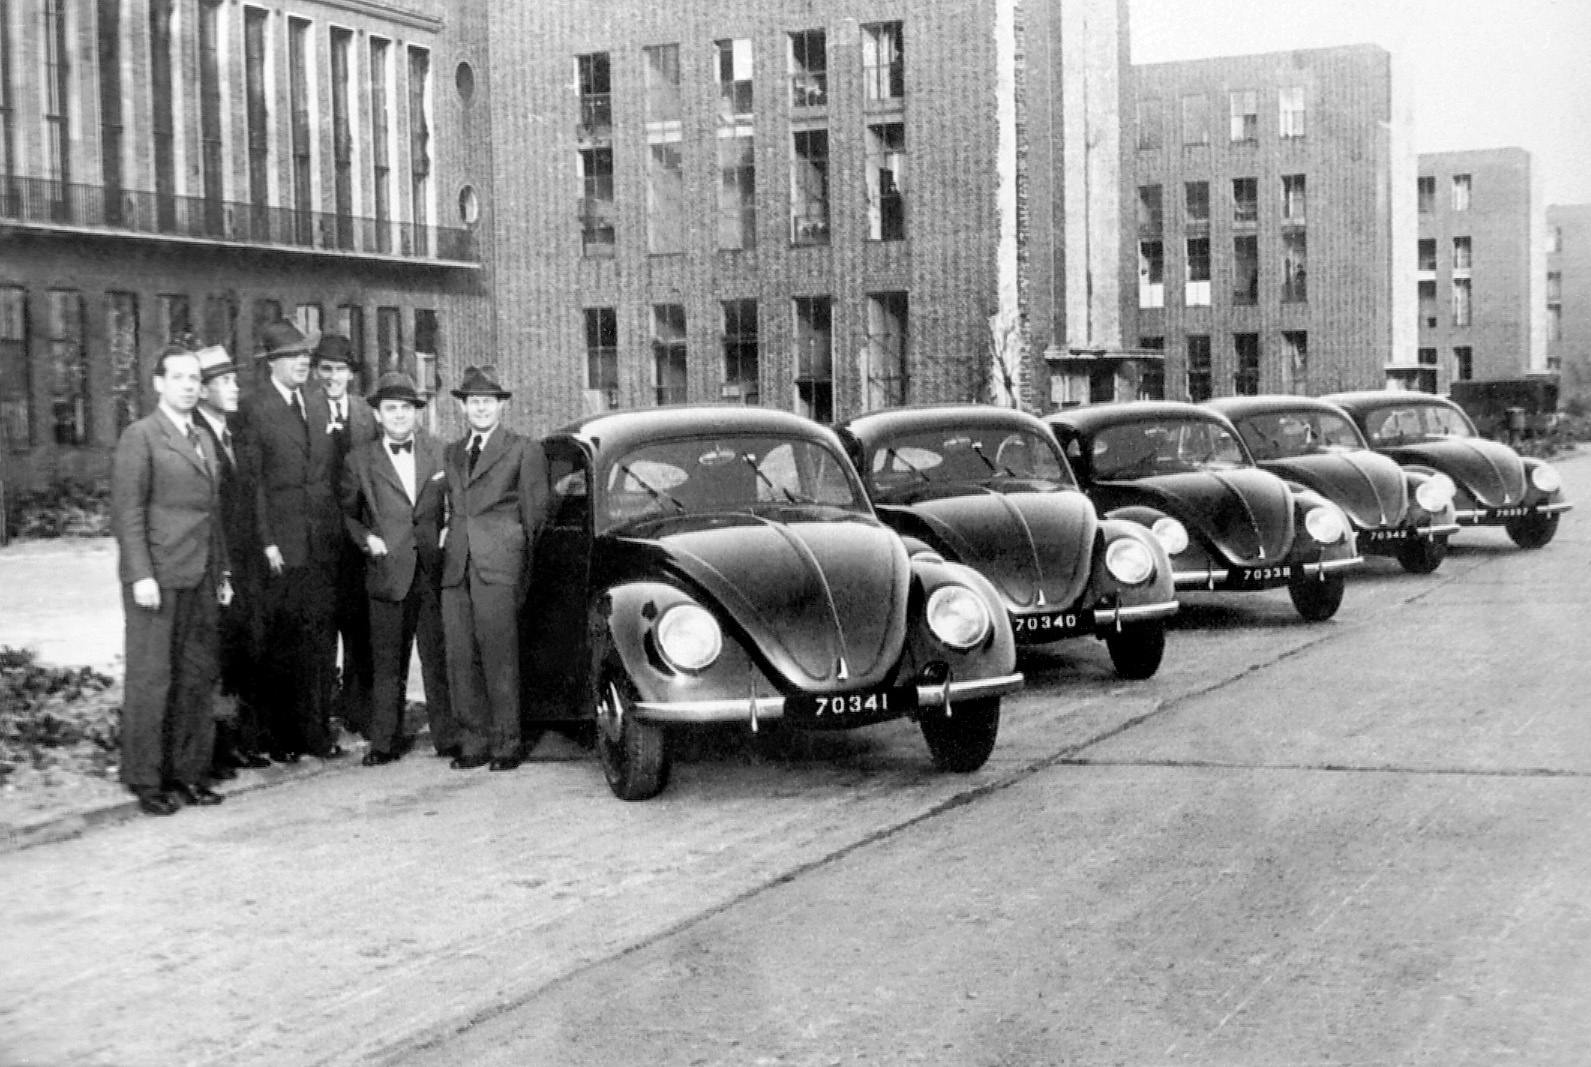 British take over Volkswagen 1945 - First exports